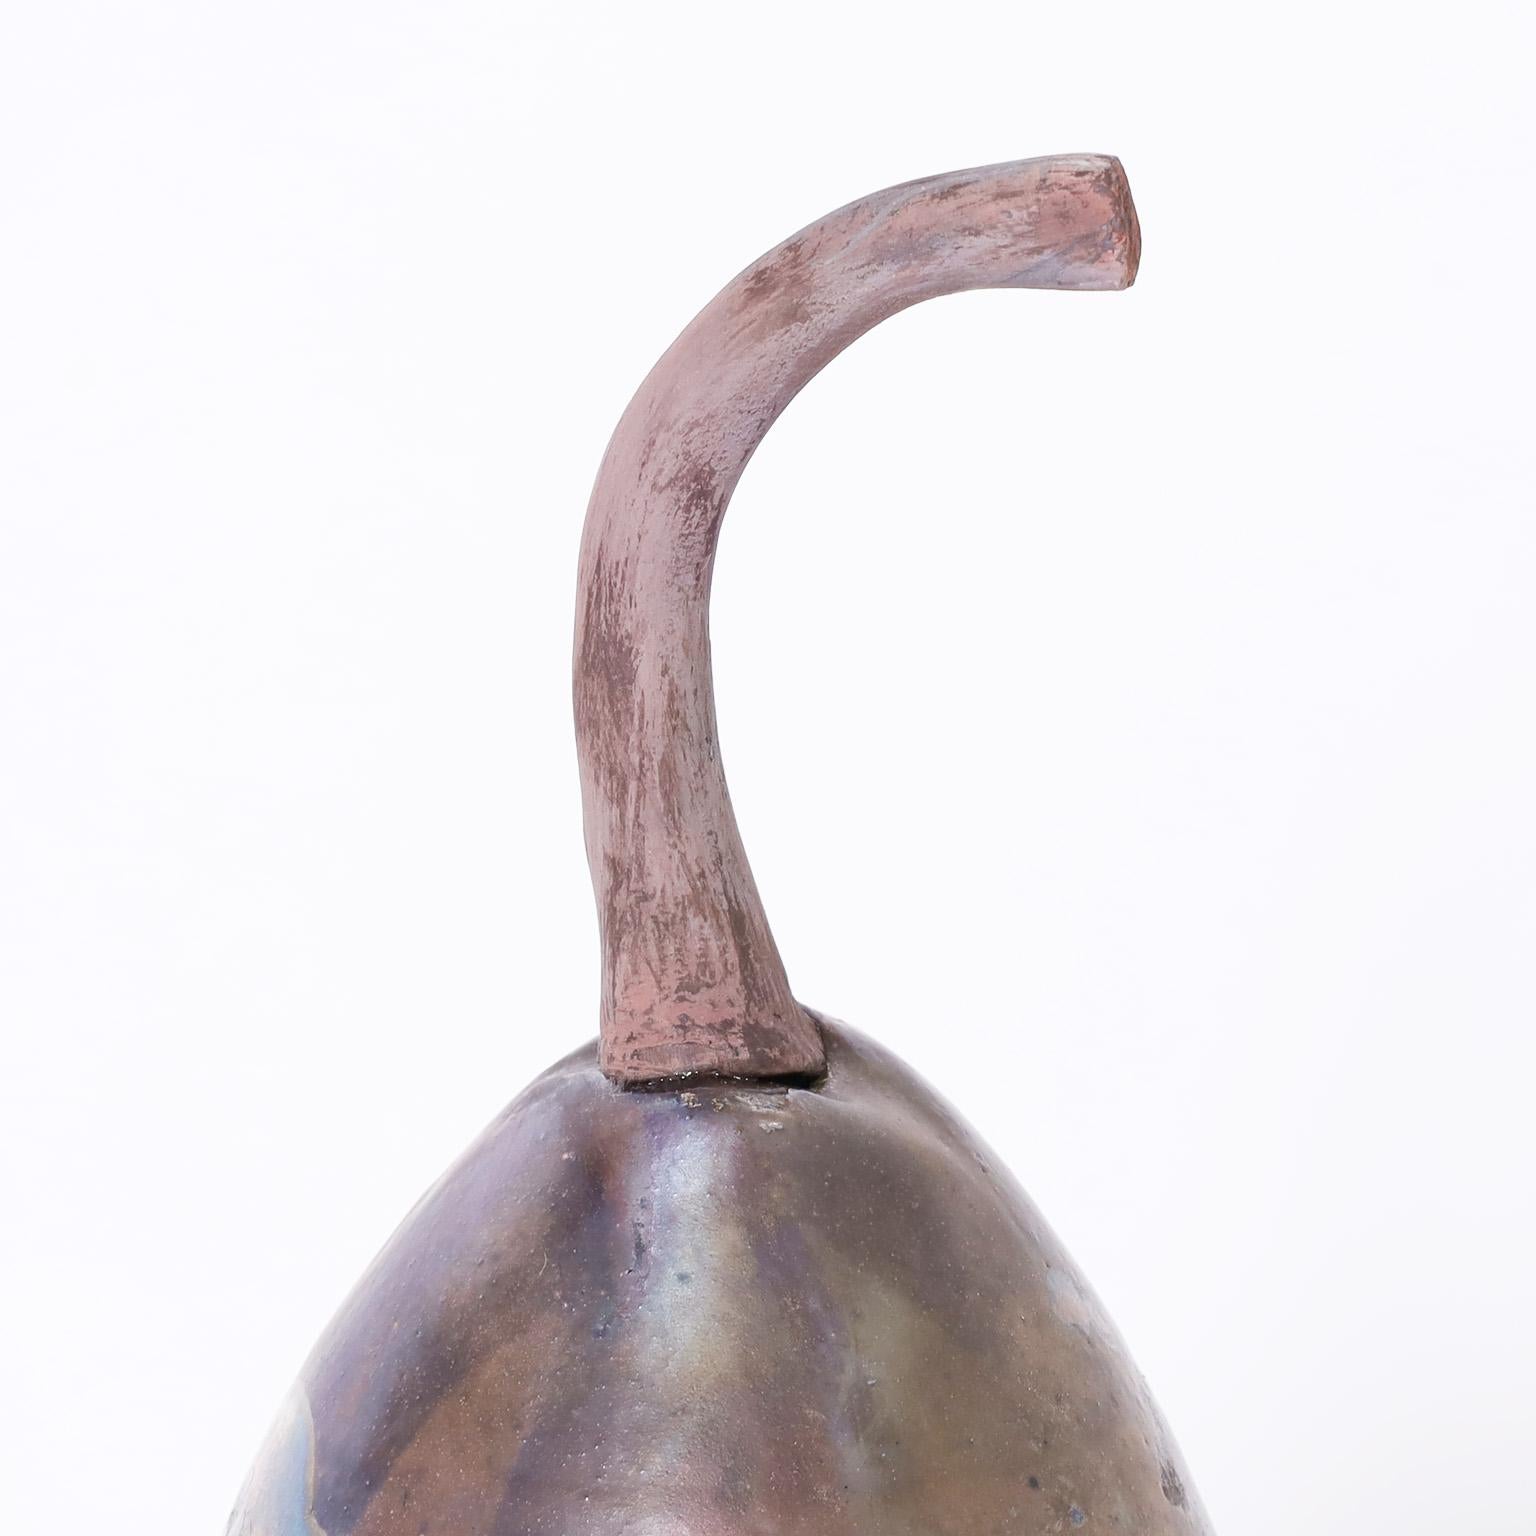 Standout pottery pear sculpture or object of art featuring a distinctive raku style glaze. Signed by noted pottery artist Steven Forbes-deSoule on the bottom.